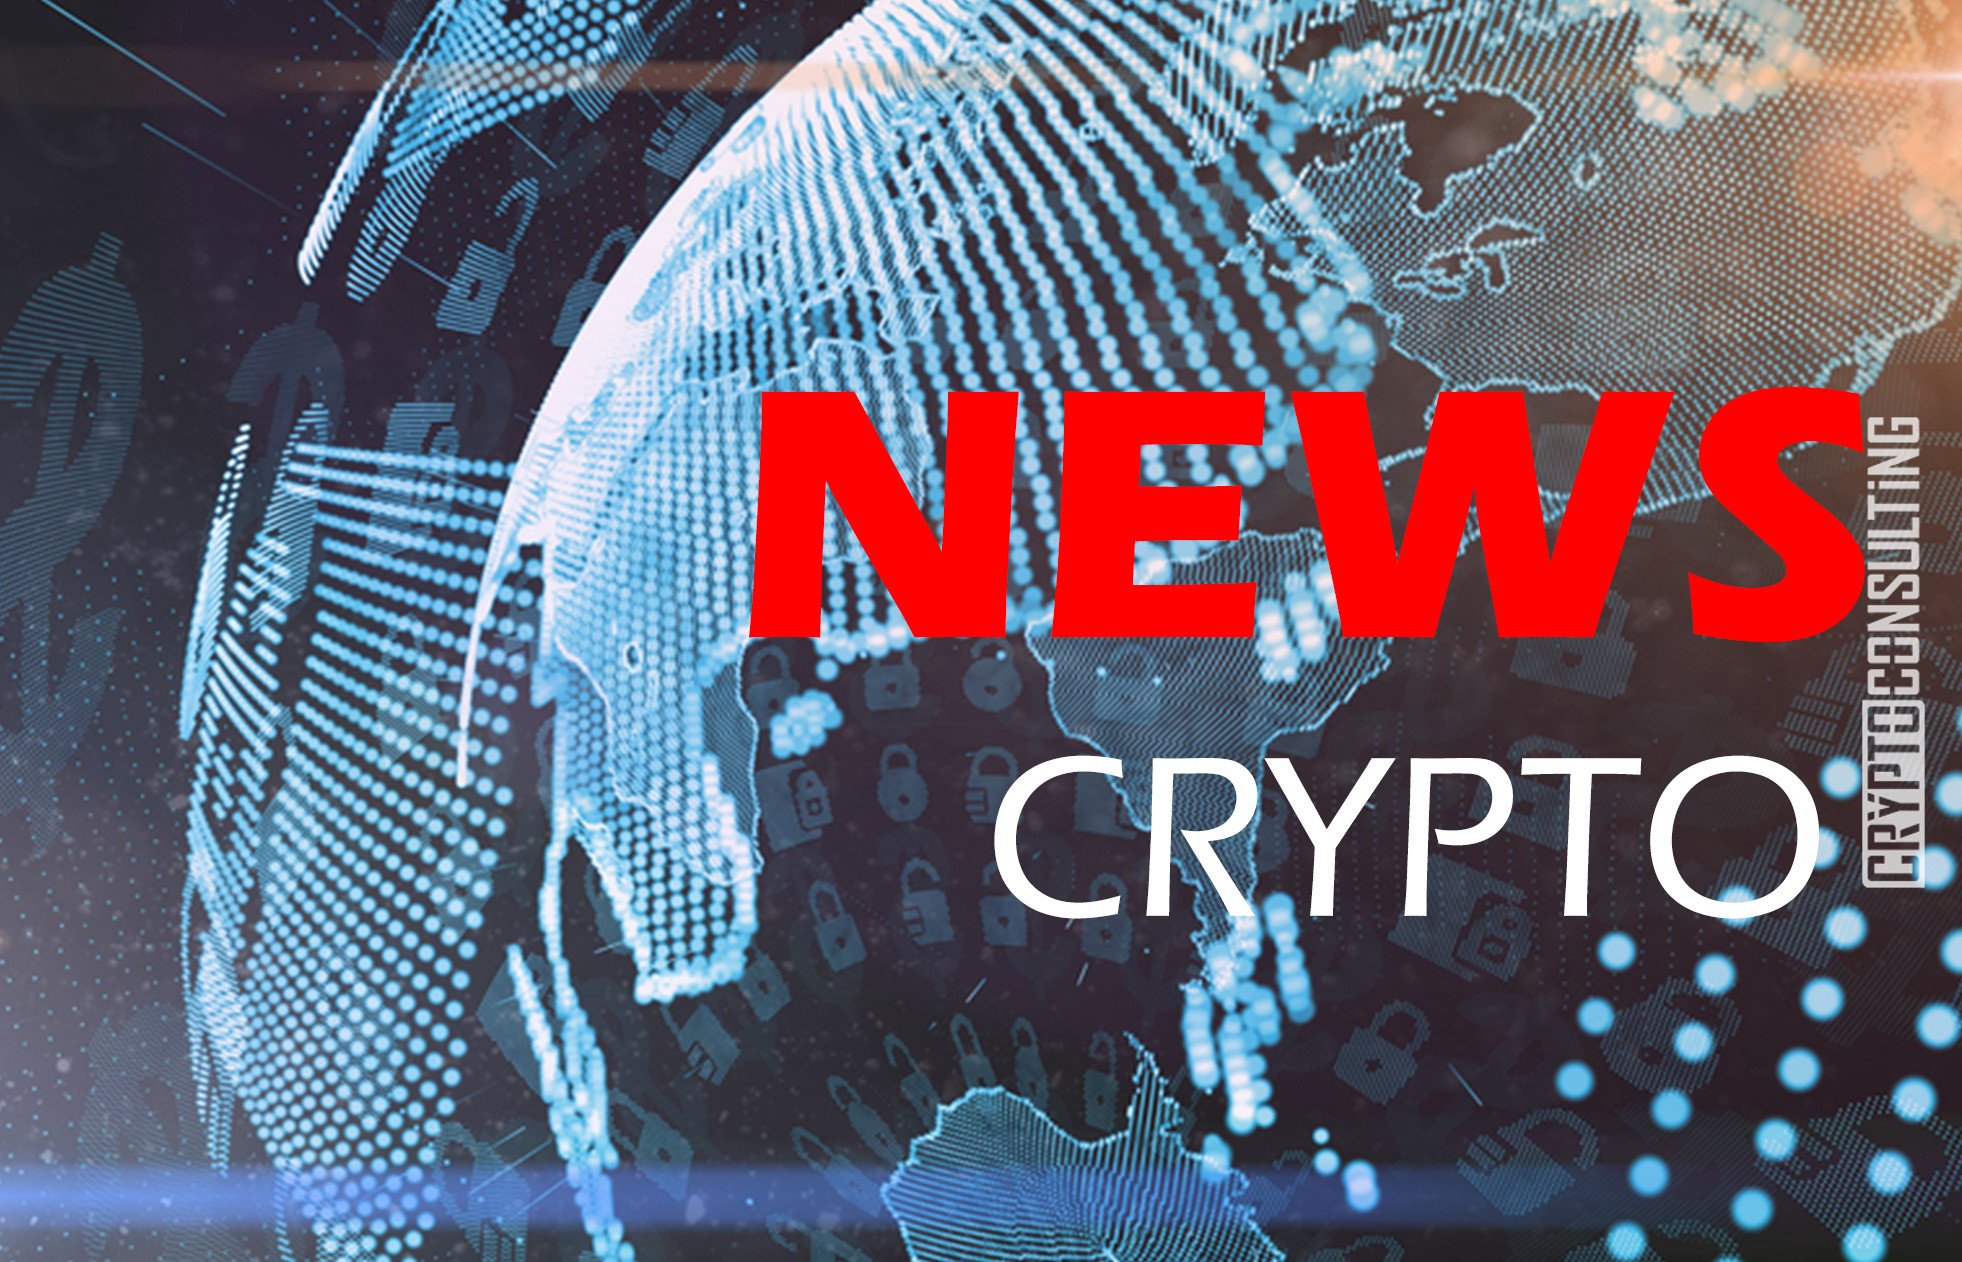 Etp news crypto ecn forex brokers in cyprus there is always a reason